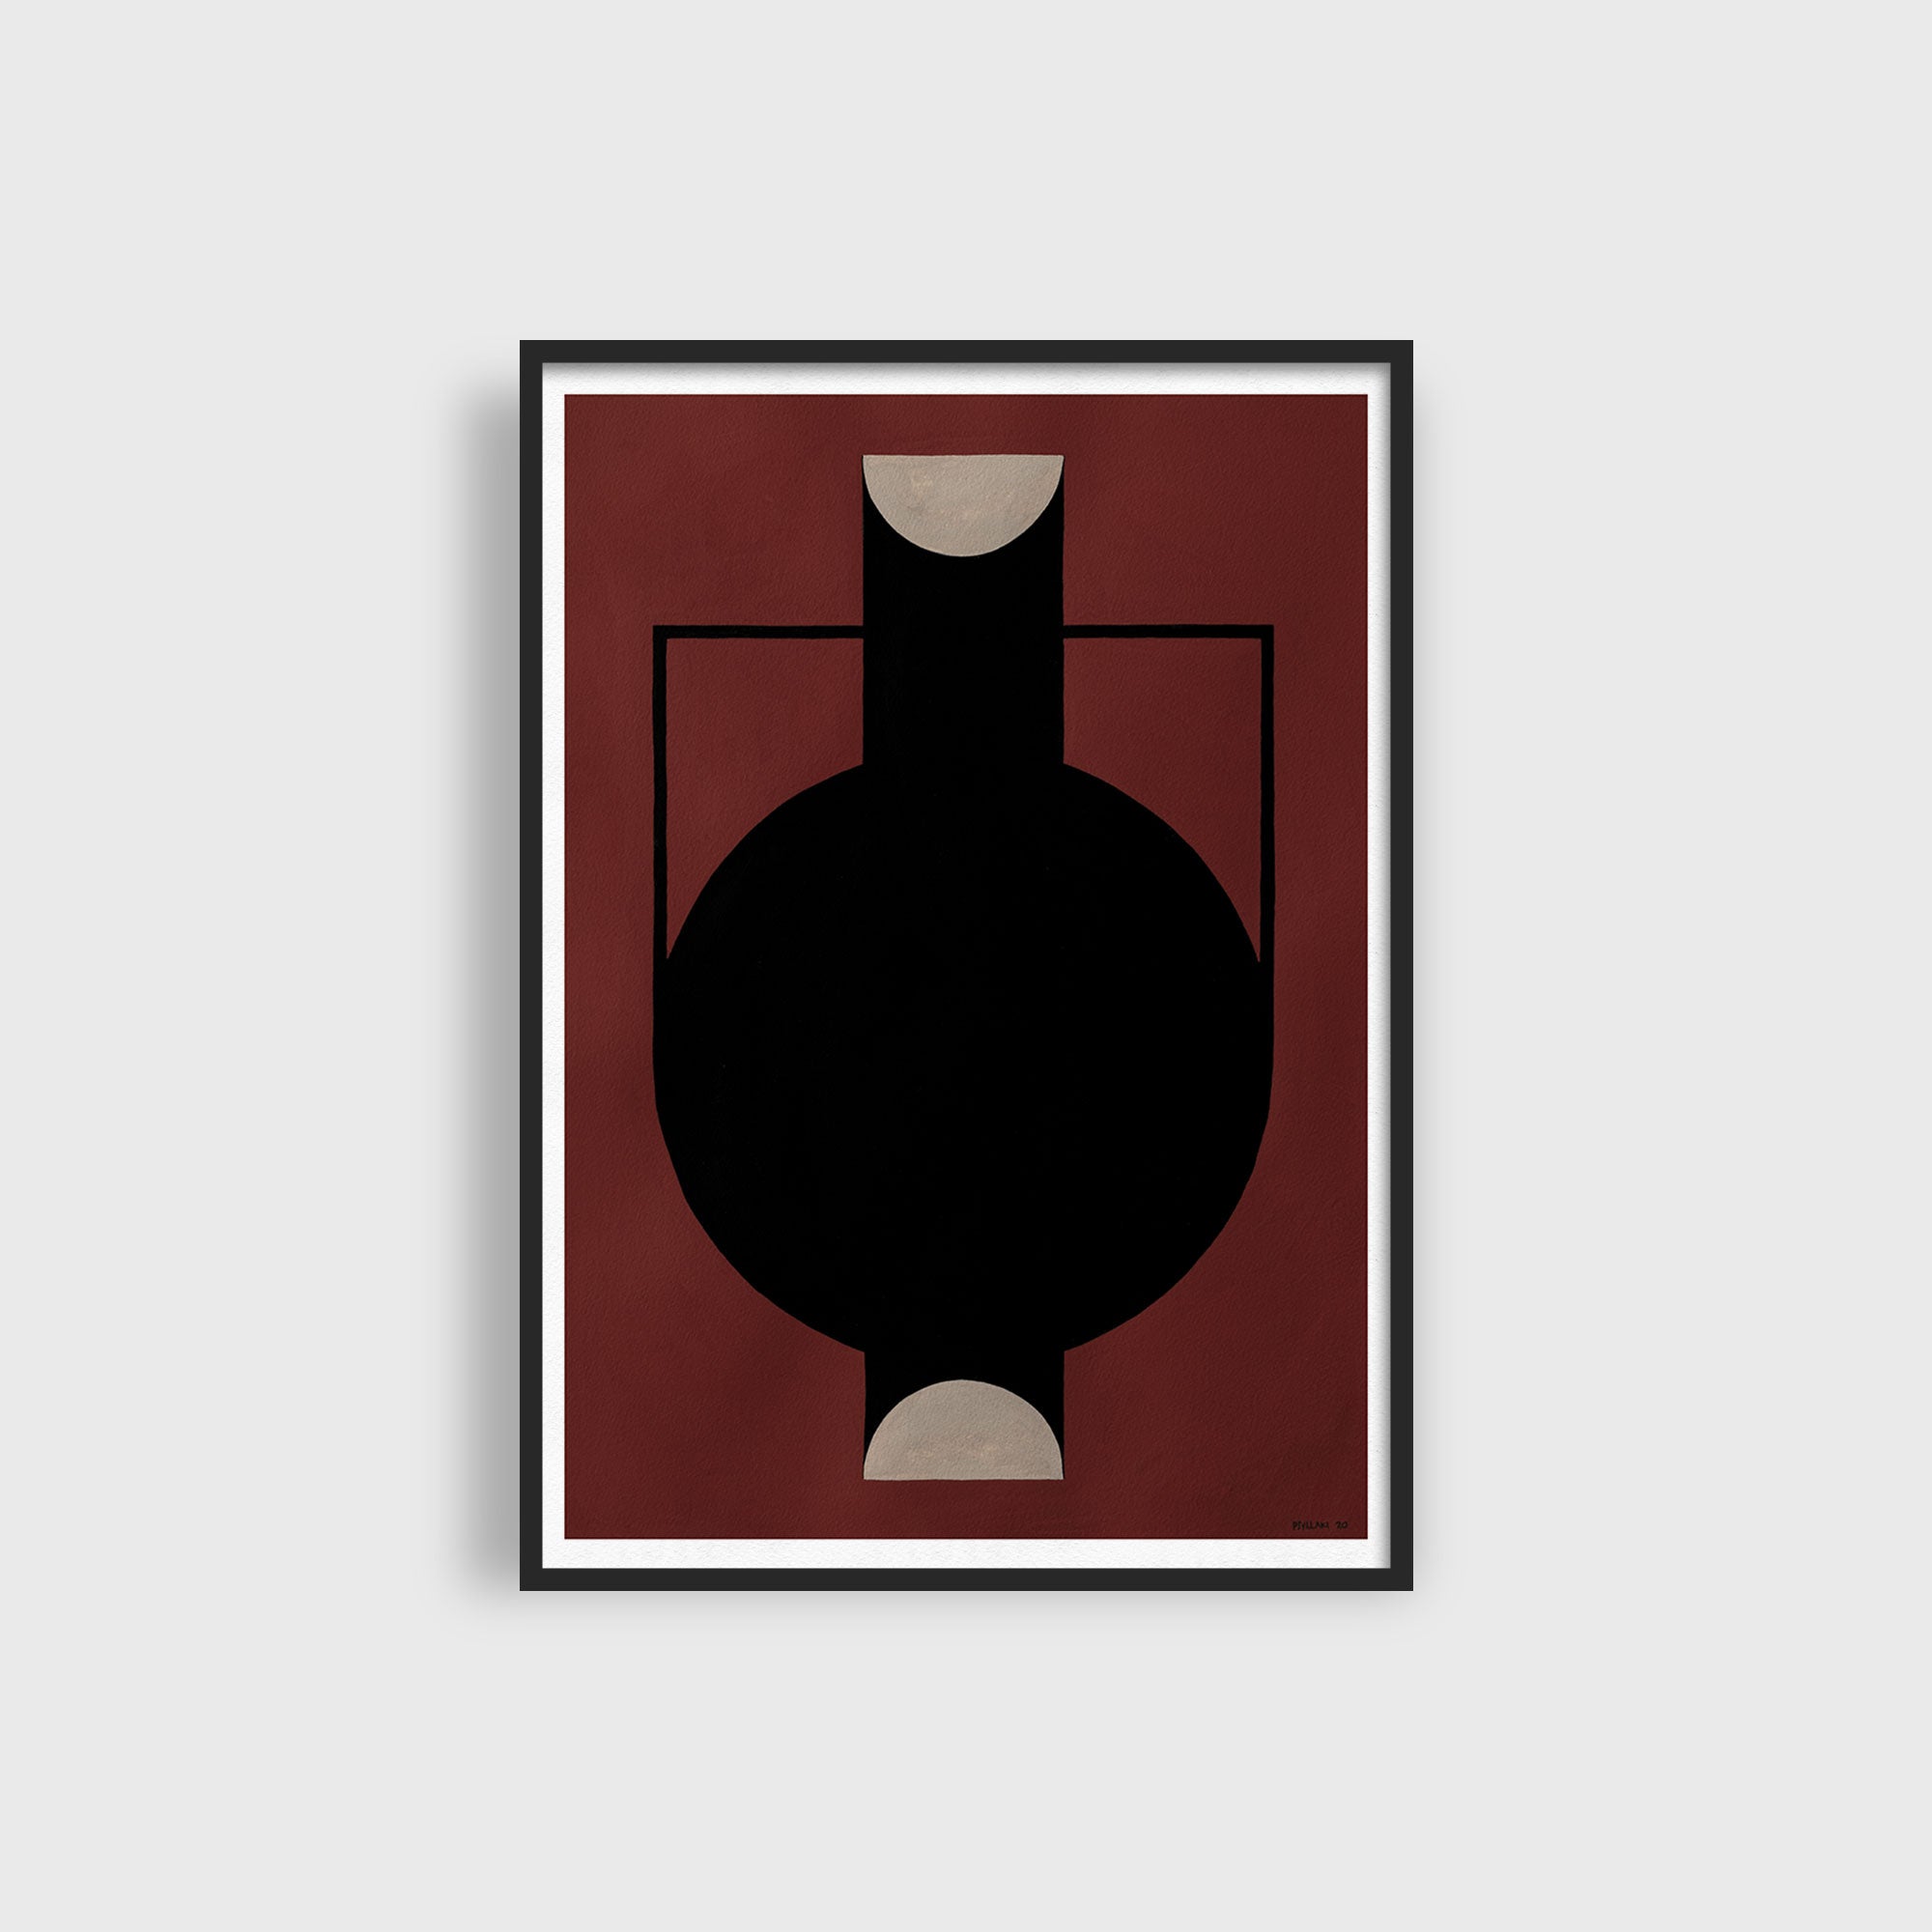 SILHOUETTE OF A VASE 04